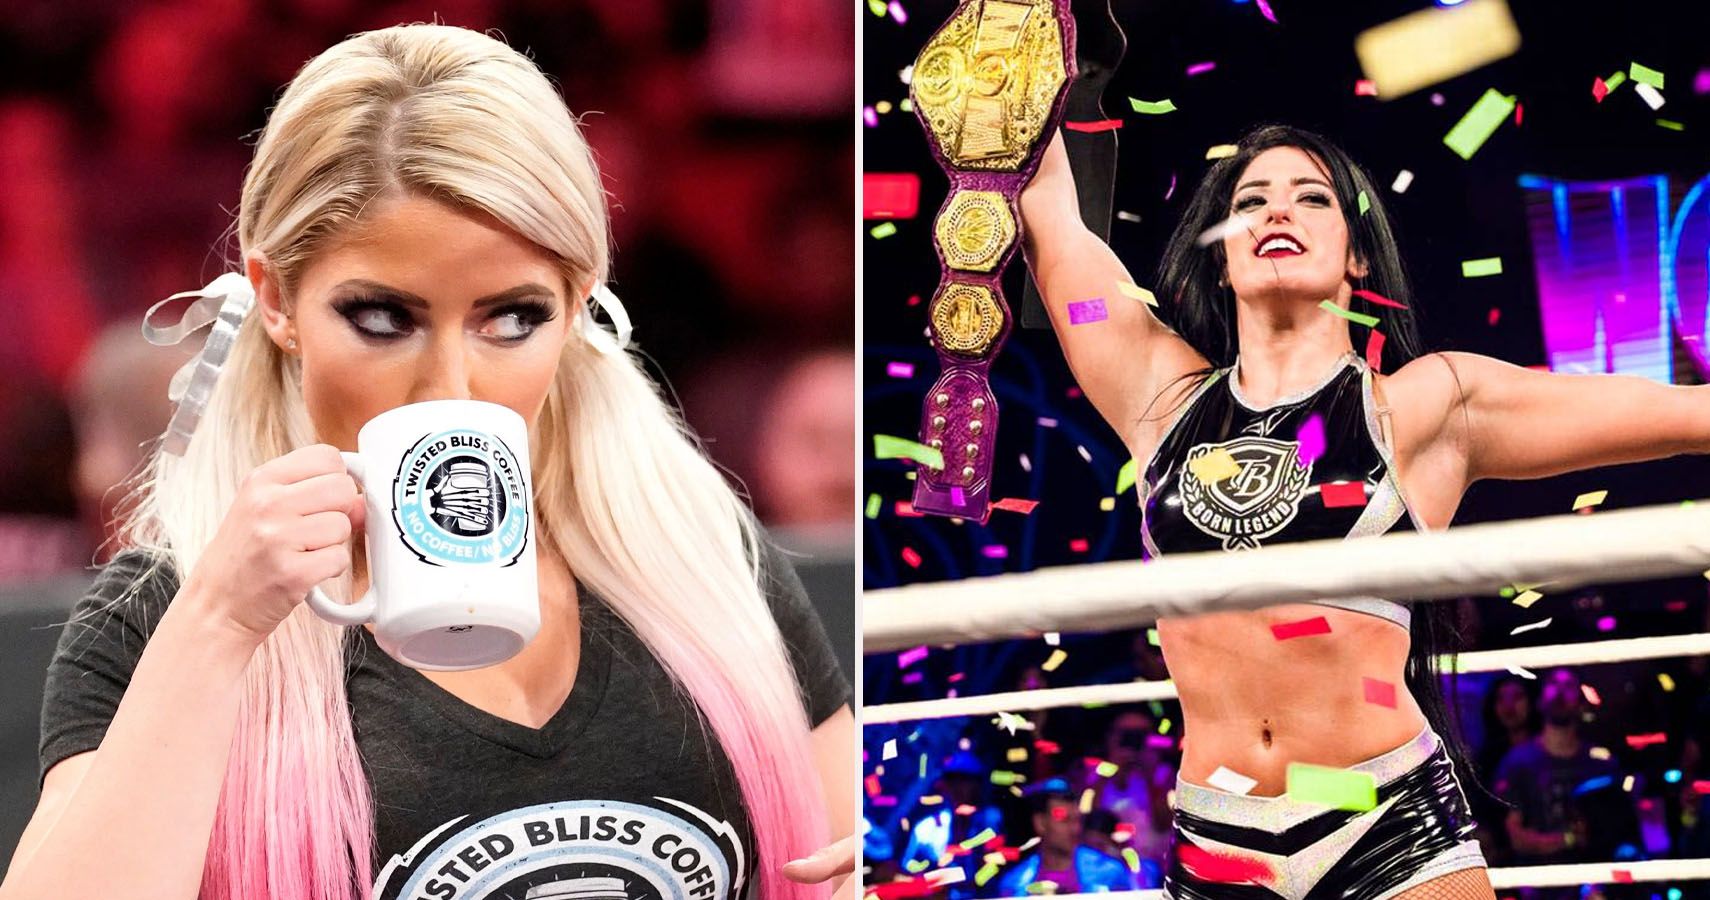 Wrestling news: The top 10 women wrestlers of 2019 - Sports